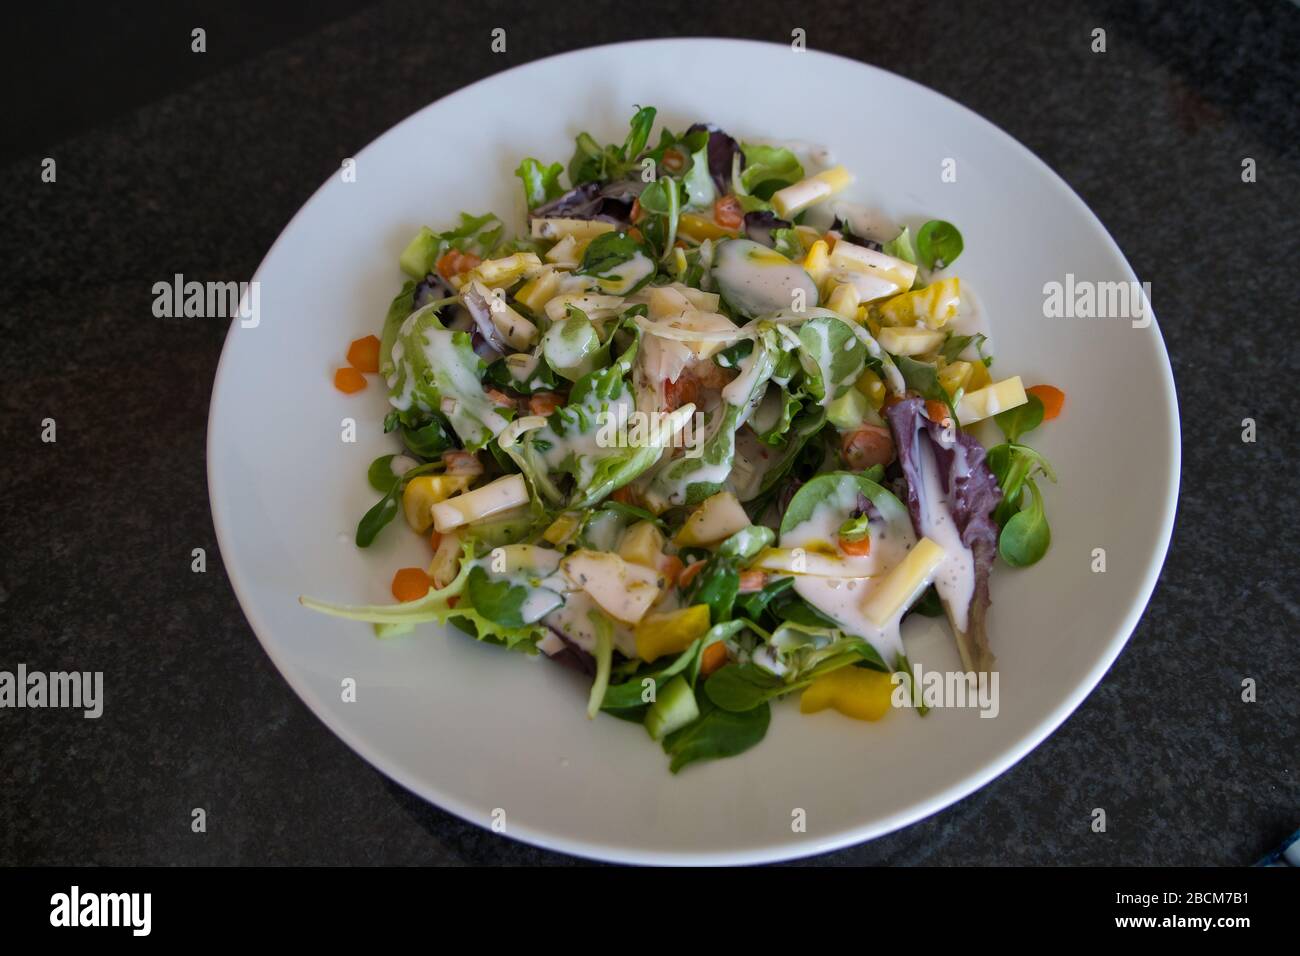 Mixed vegetarian organic salad plate with tomatoes, eggs, bell pepper, lamb's lettuce, balsamic vinegar, croutons and yoghurt dressing, product image Stock Photo